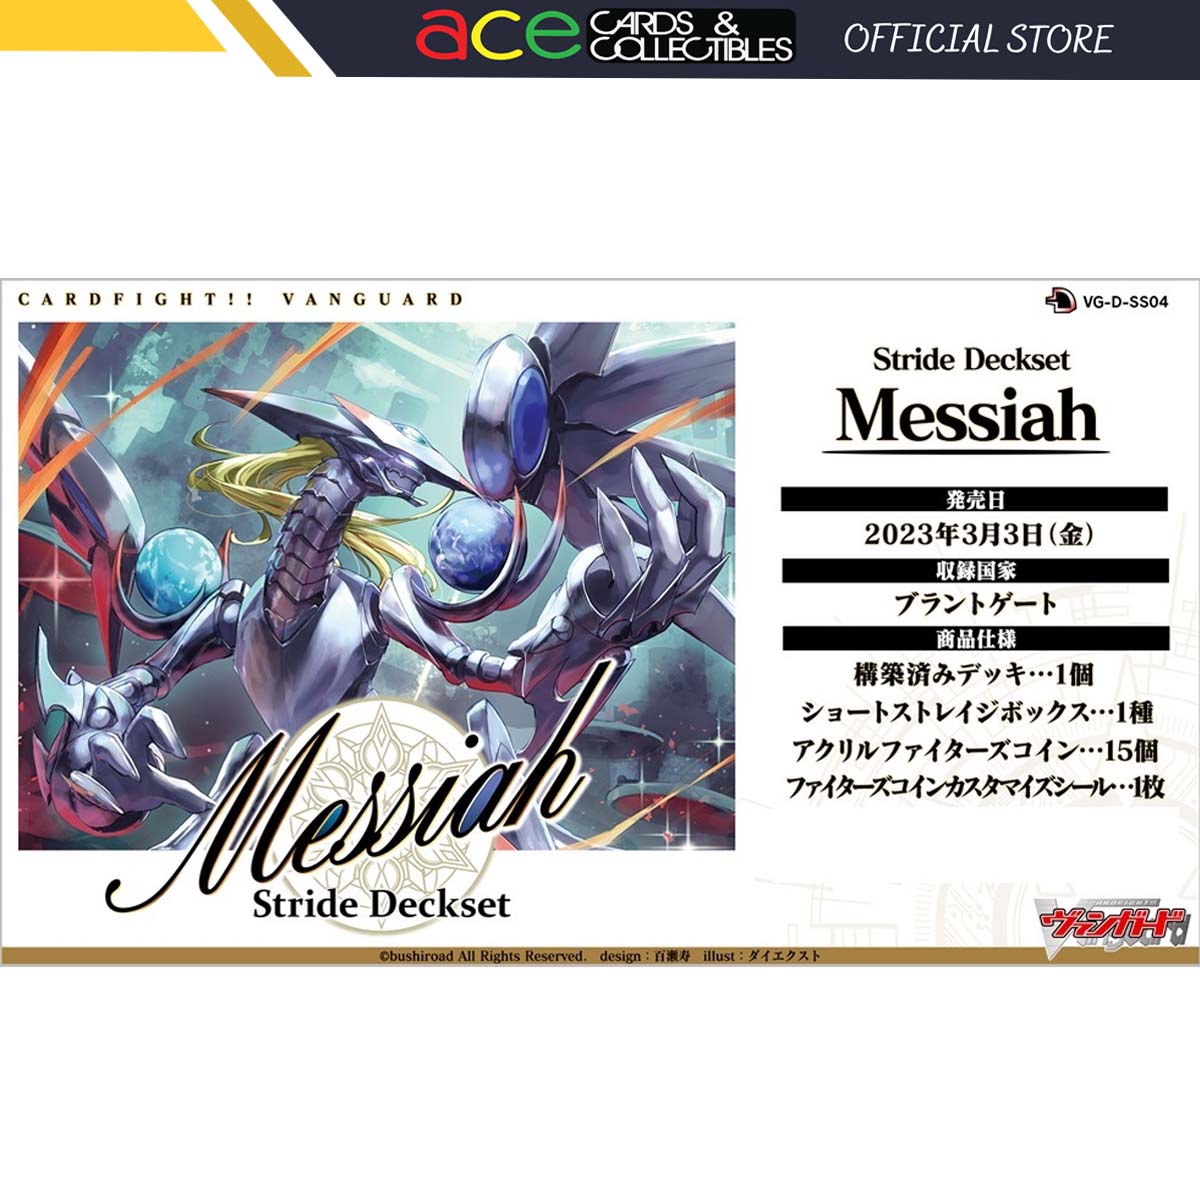 Cardfight!! Vanguard OverDress Special Series Vol. 4 "Stride Deckset Messiah" [VG-D-SS04] (Japanese)-Bushiroad-Ace Cards & Collectibles